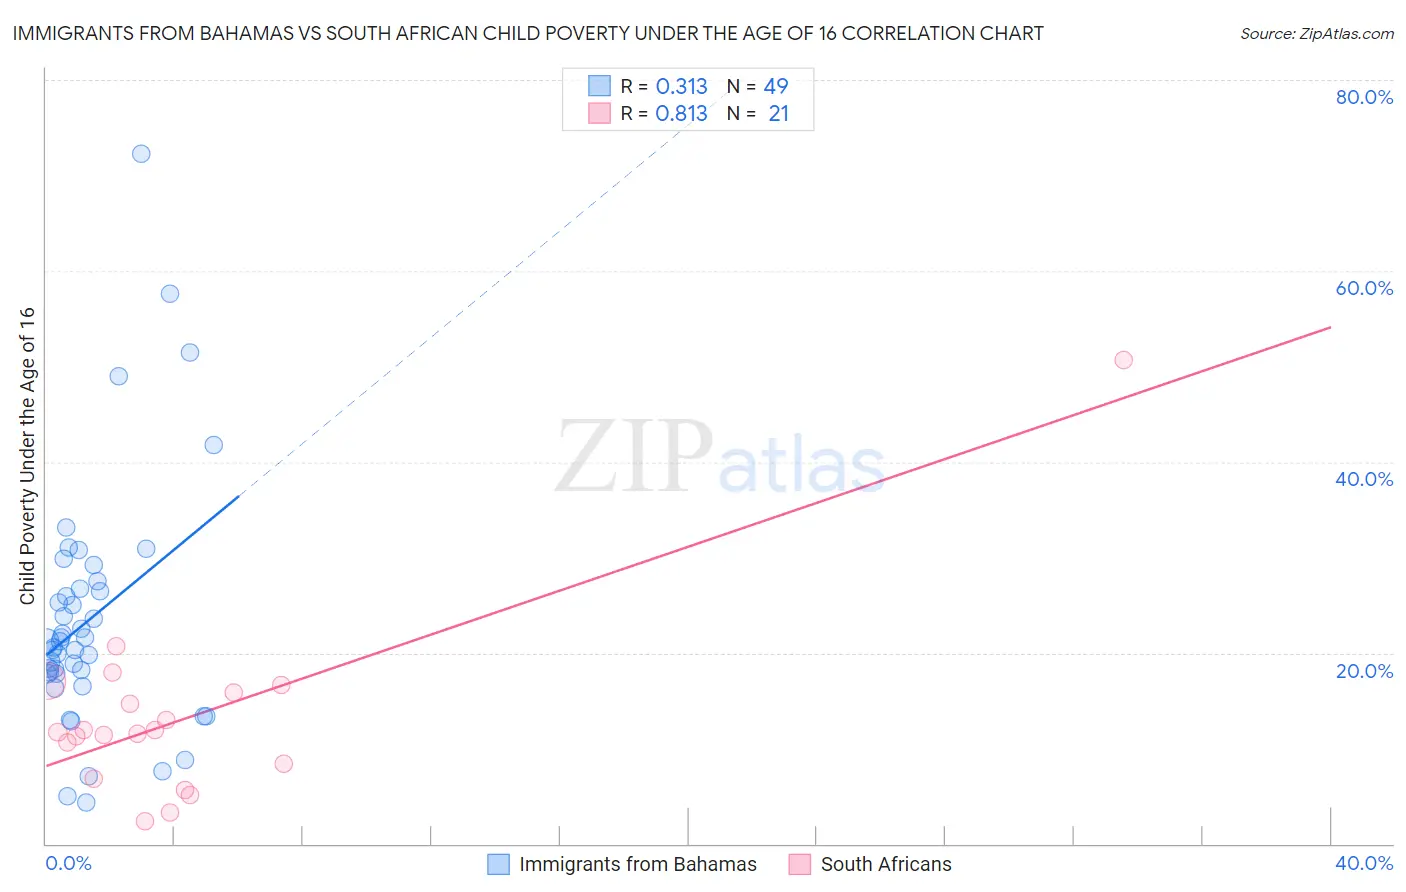 Immigrants from Bahamas vs South African Child Poverty Under the Age of 16